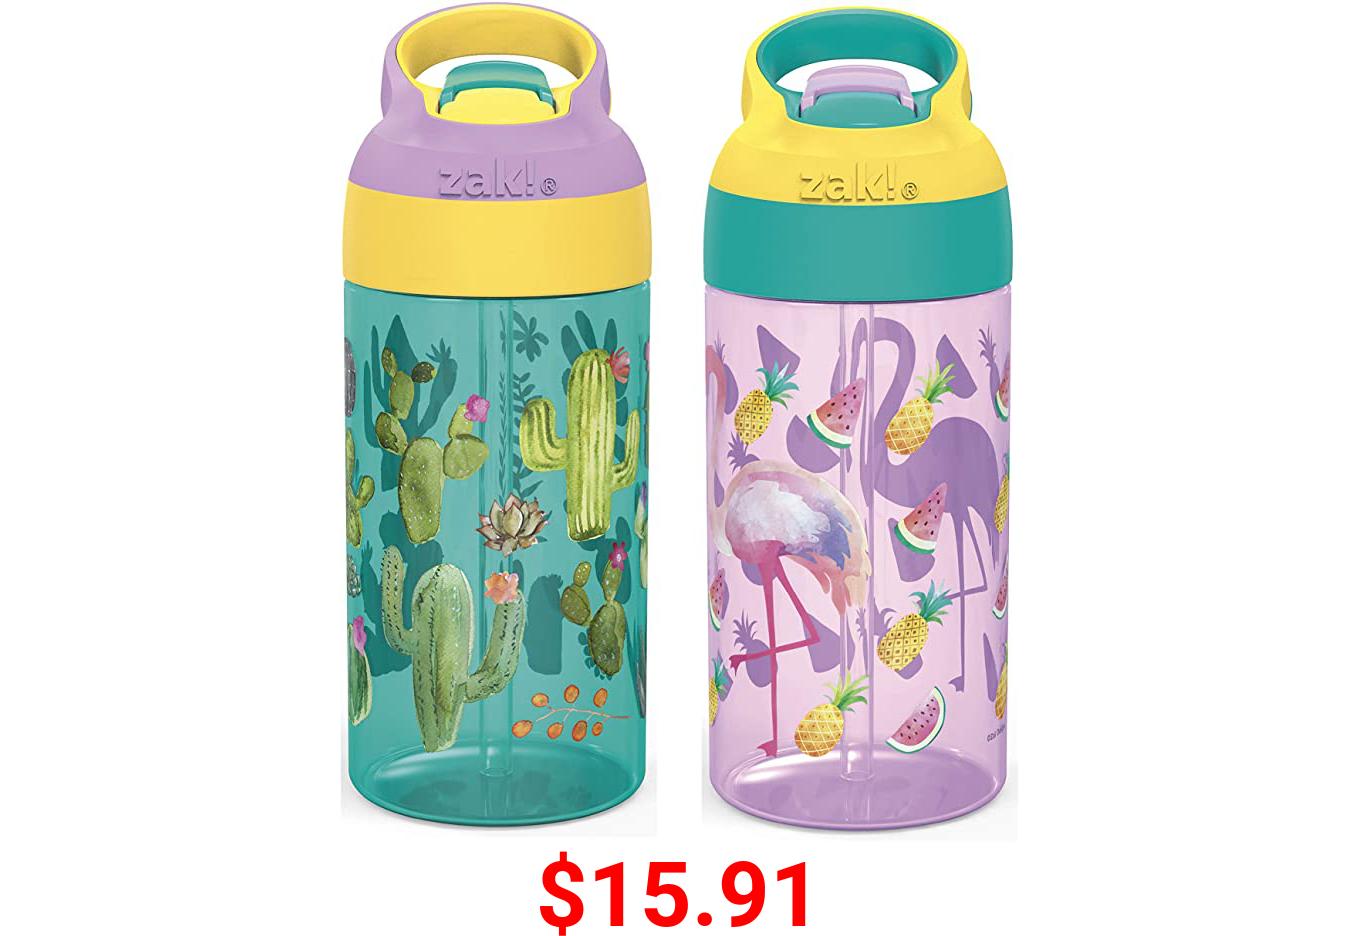 Zak Designs 16oz Riverside Desert Life Kids Water Bottle with Straw and Built in Carrying Loop Made of Durable Plastic, Leak-Proof Design for Travel, 2PK Set, Cactus-Flamingo Pineapple